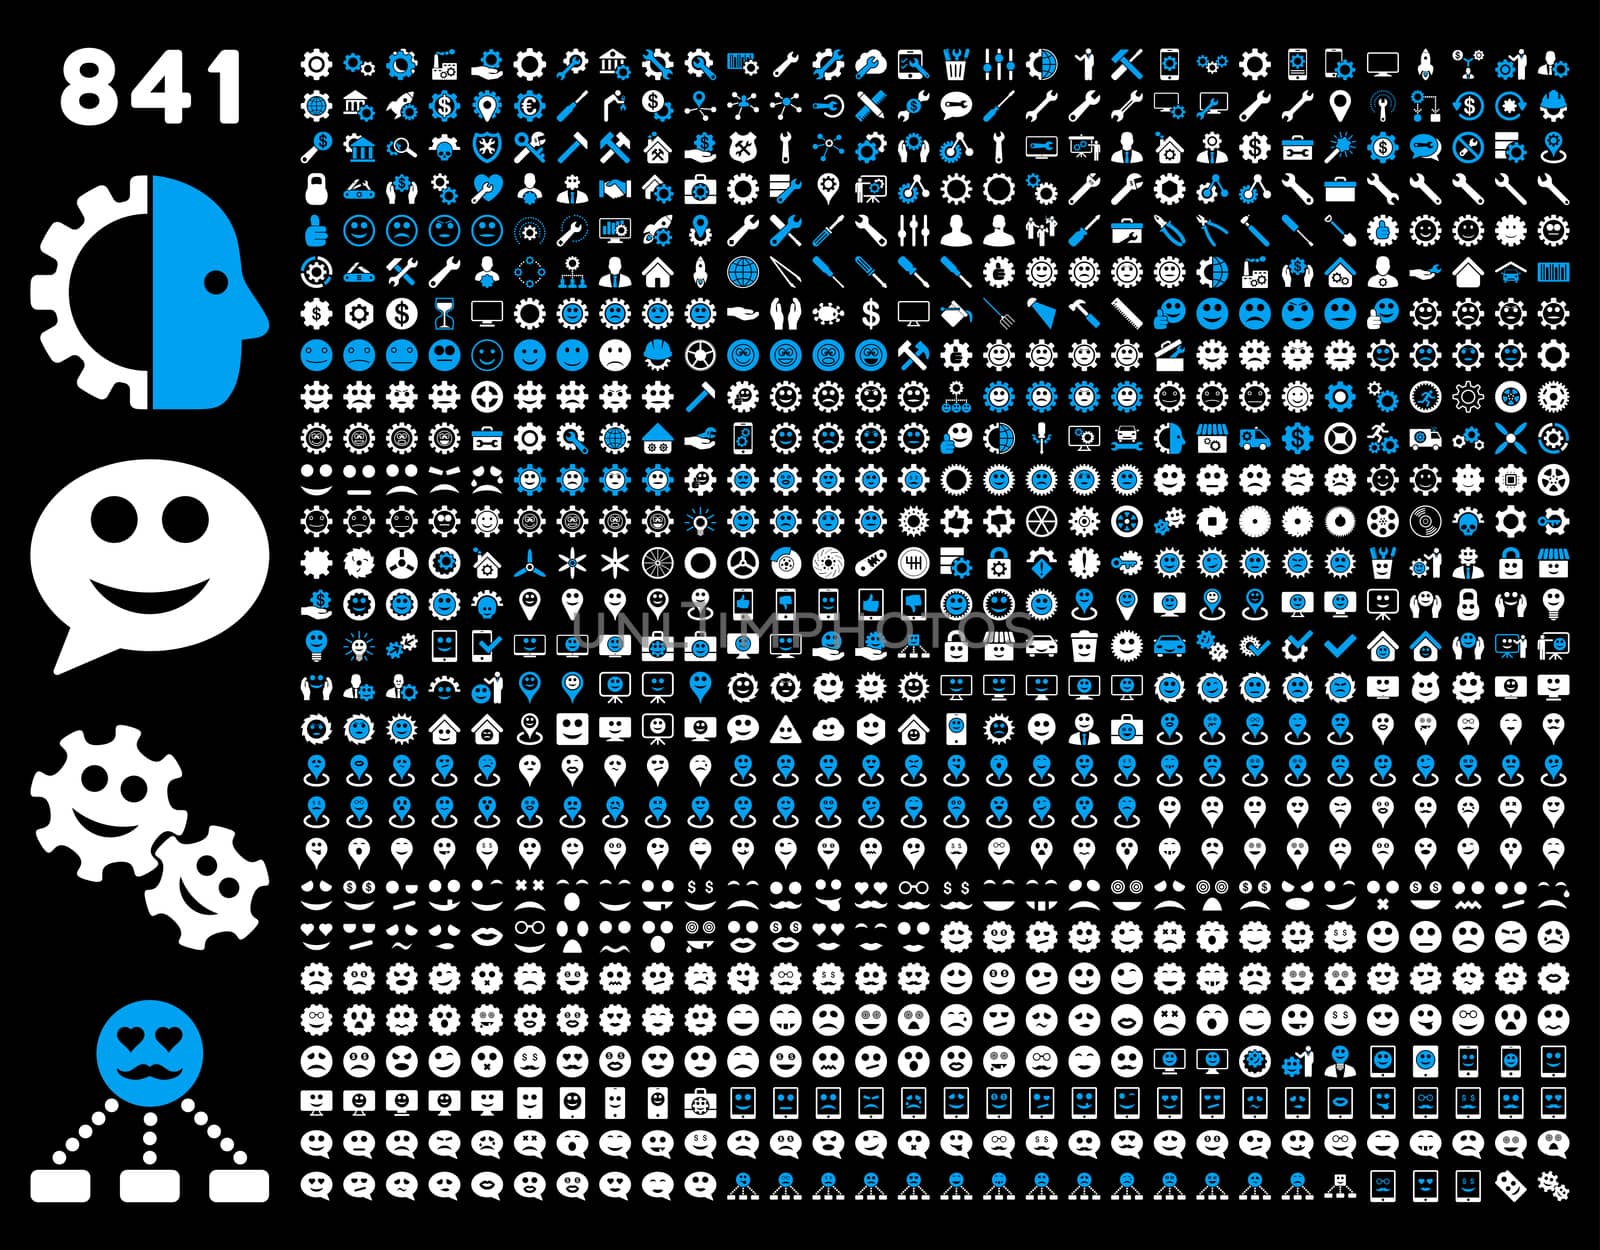 841 smile, tool, gear, map markers, mobile icons. Glyph set style: bicolor flat images, blue and white symbols, isolated on a black background.